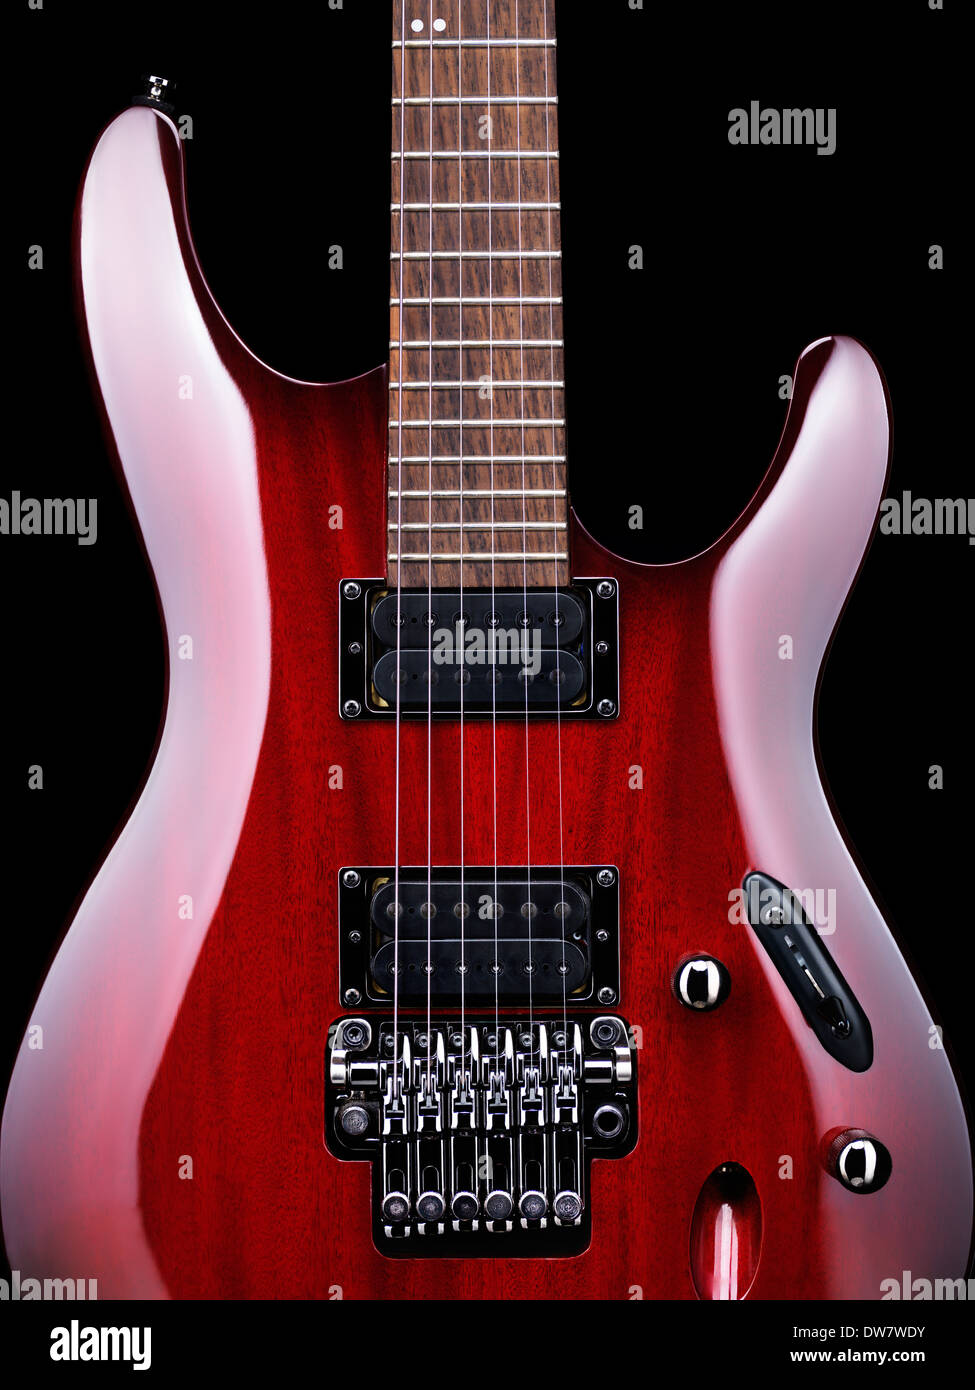 Red electric guitar Ibanez S-series S420 closeup detail on black background  Stock Photo - Alamy